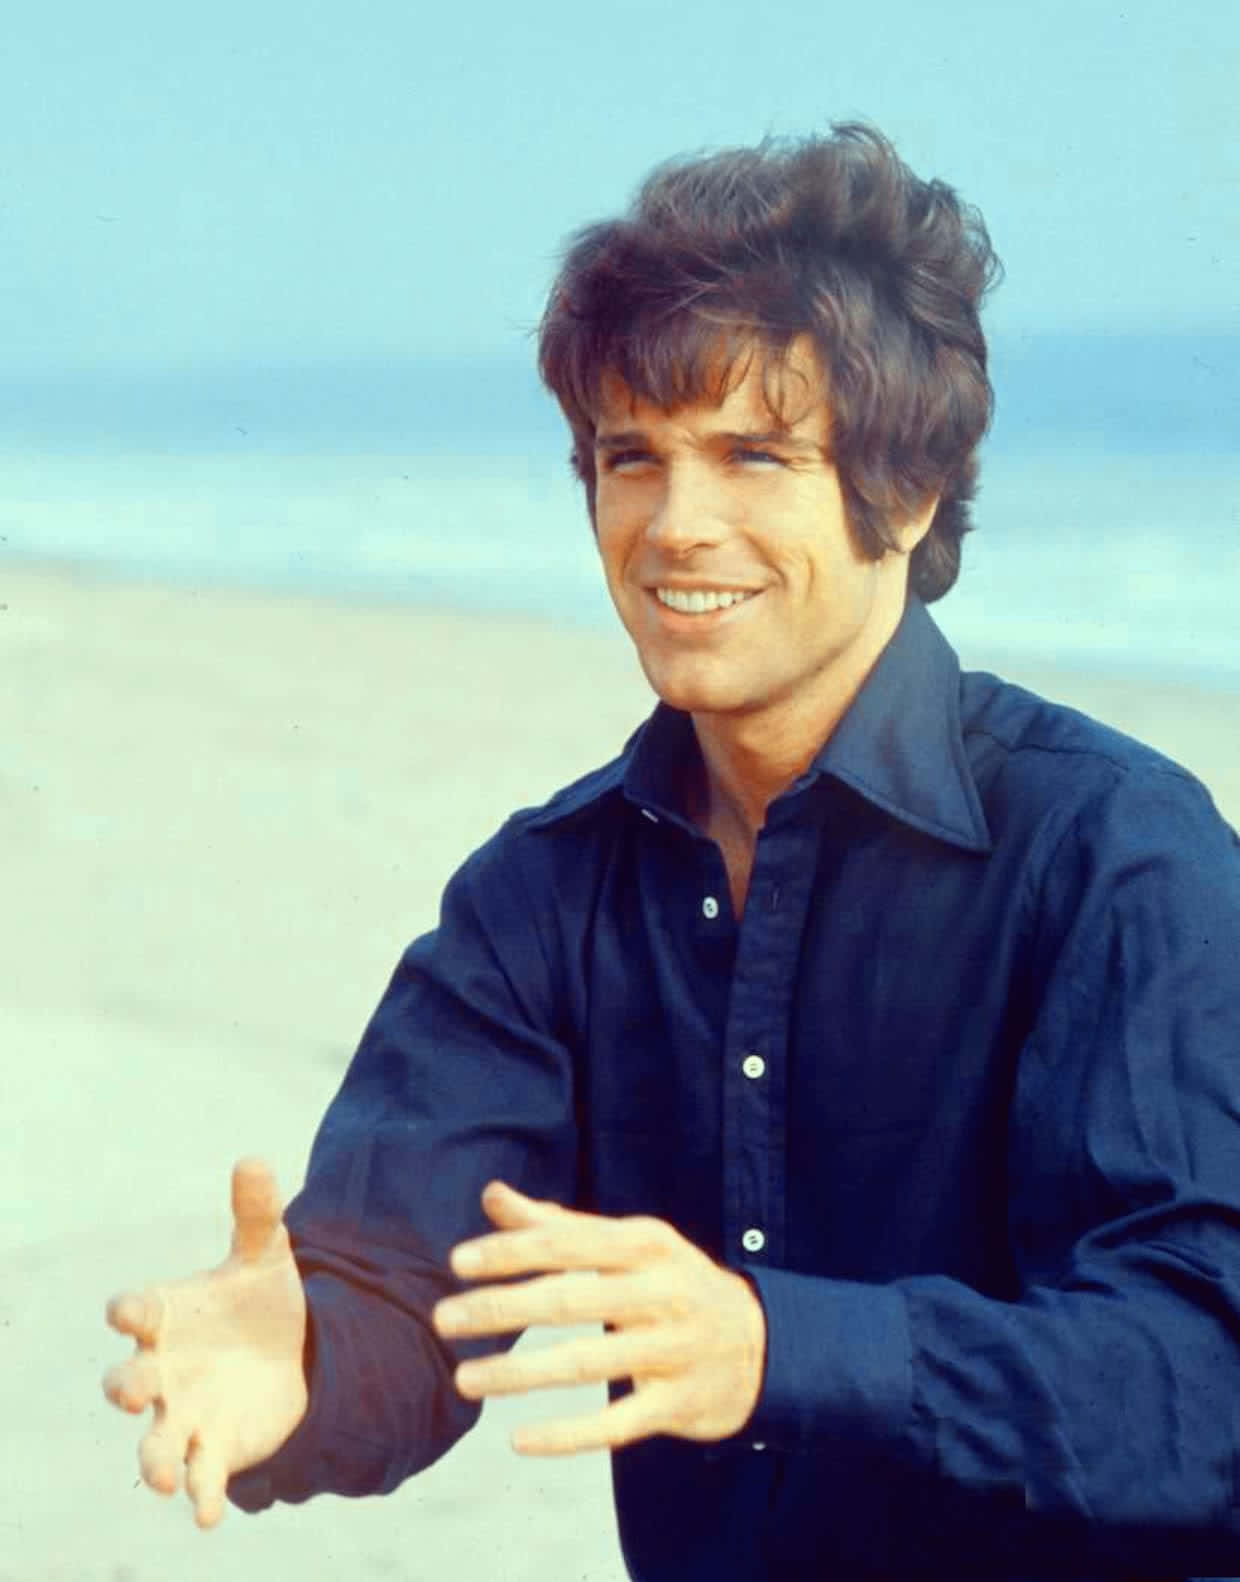 A portrait of the iconic actor Warren Beatty. Wallpaper